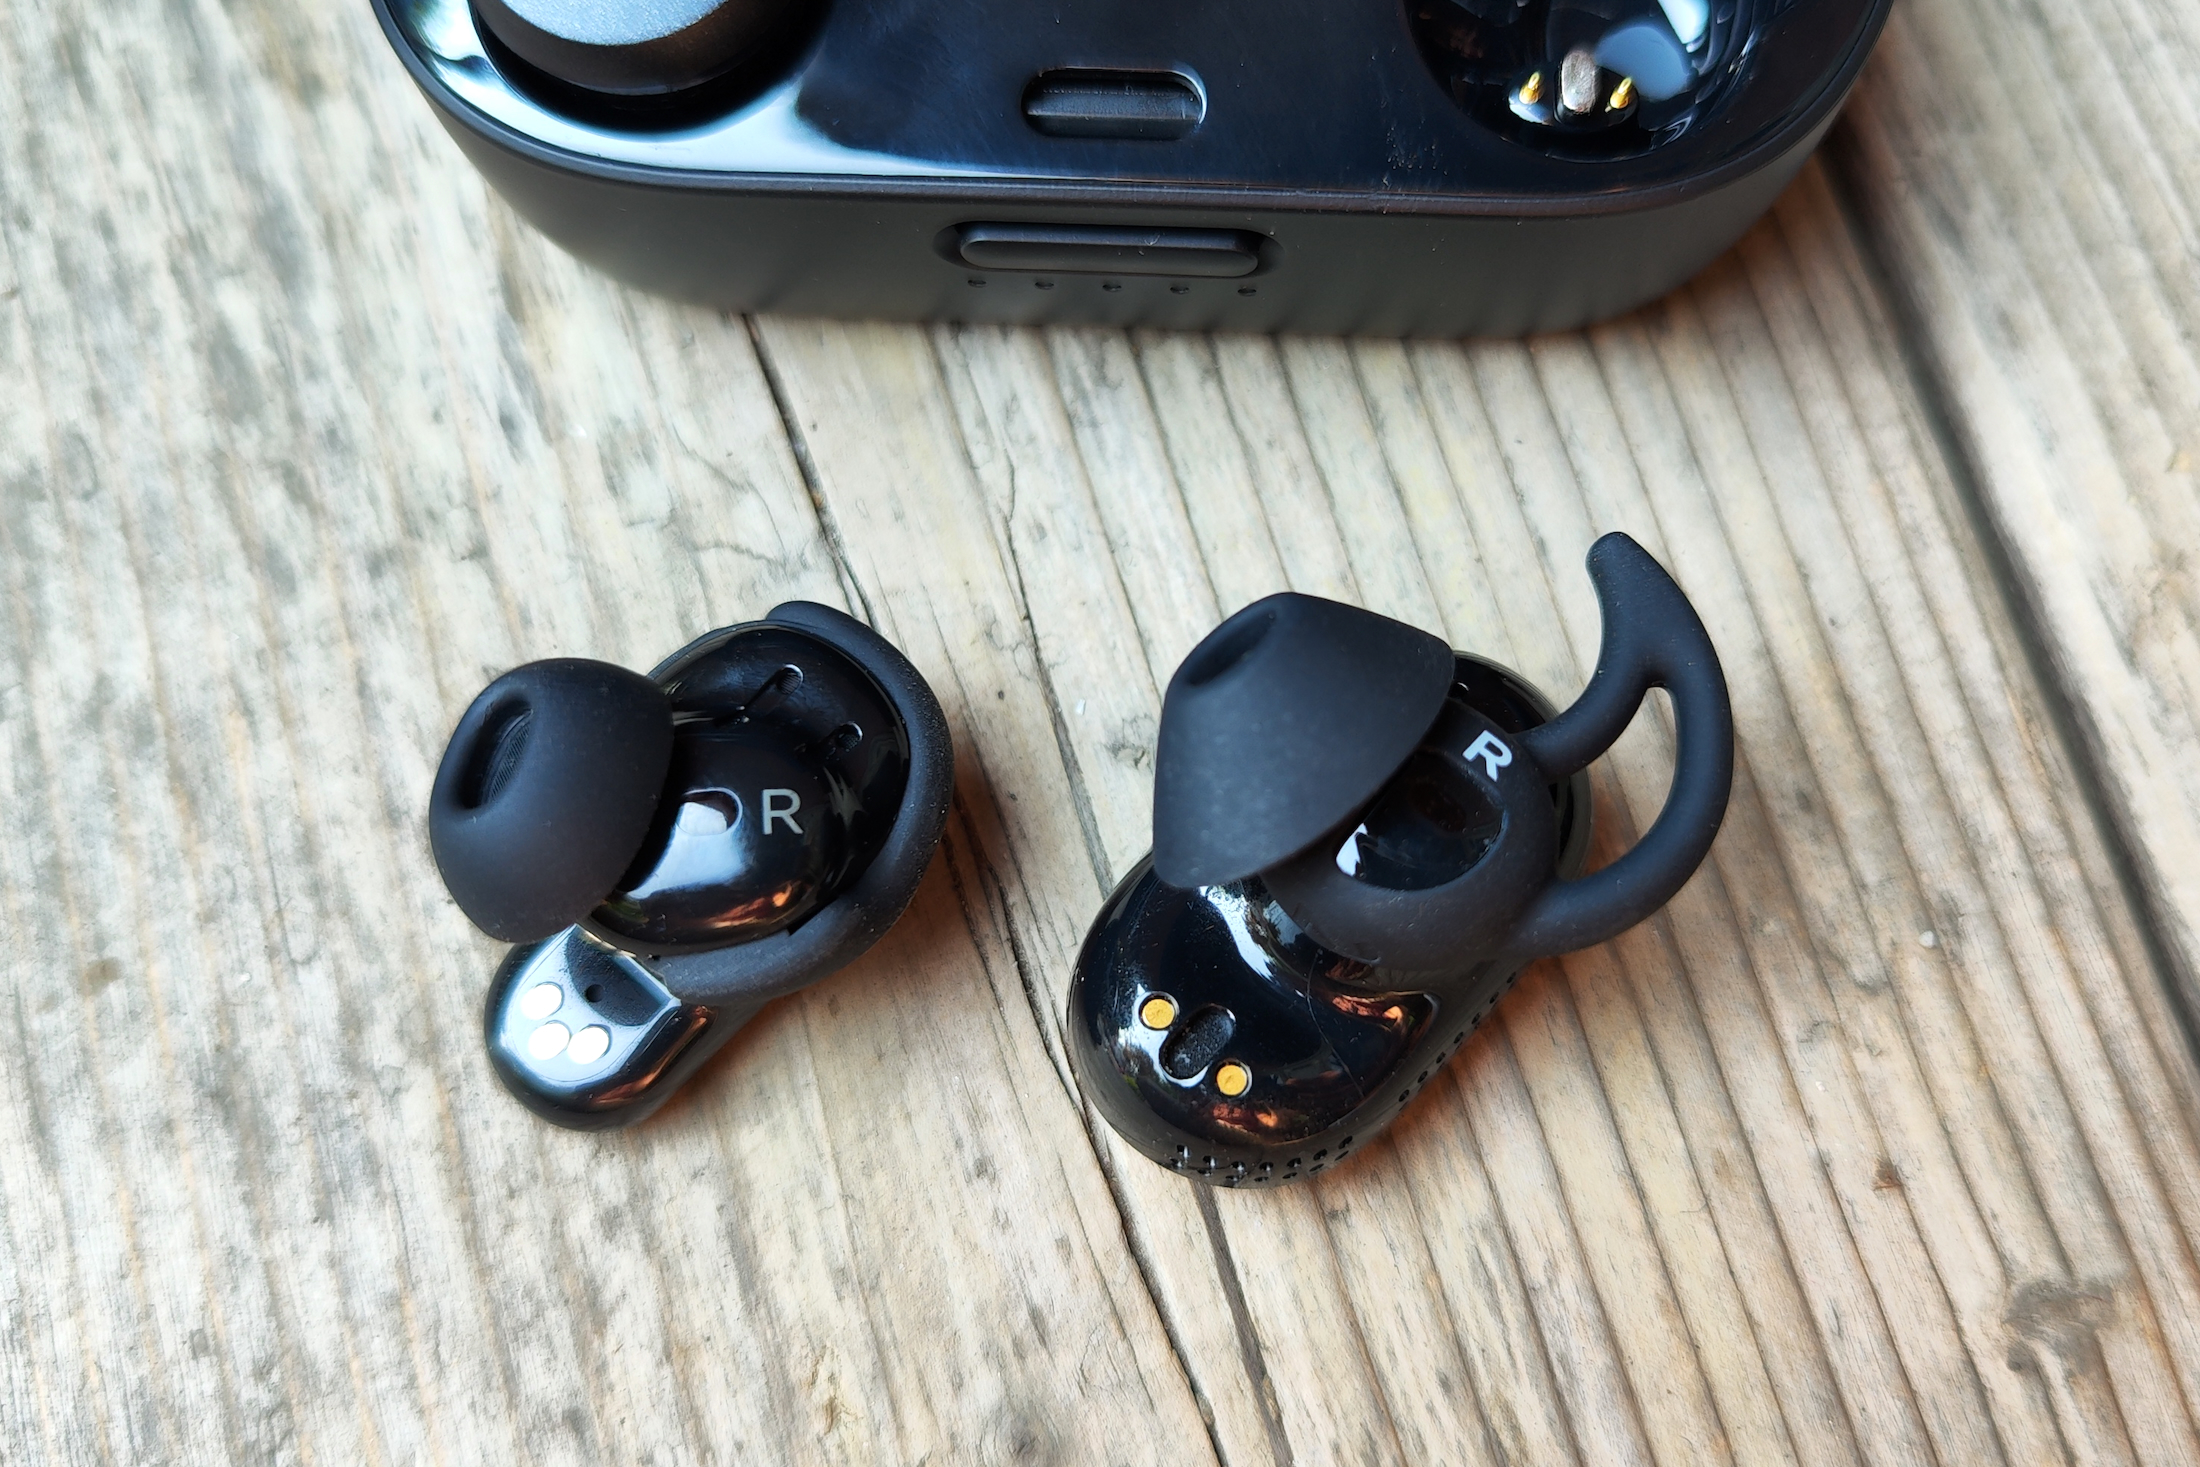 First and second-gen Bose QuietComfort Earbuds seen side-by-side.